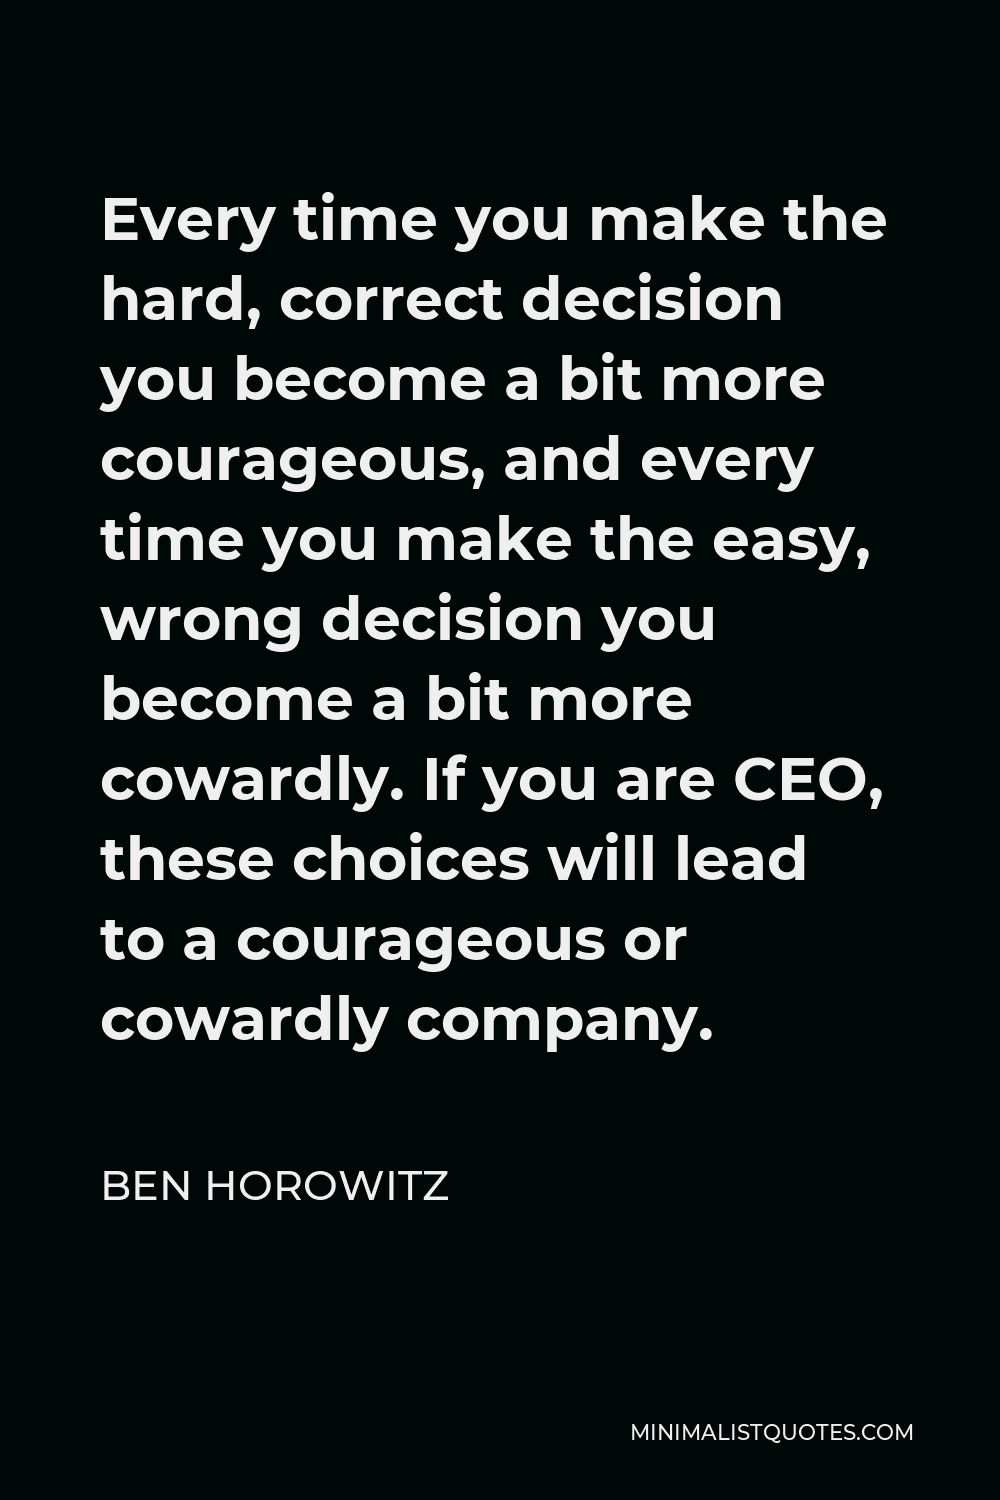 Ben Horowitz Quote - Every time you make the hard, correct decision you become a bit more courageous, and every time you make the easy, wrong decision you become a bit more cowardly. If you are CEO, these choices will lead to a courageous or cowardly company.